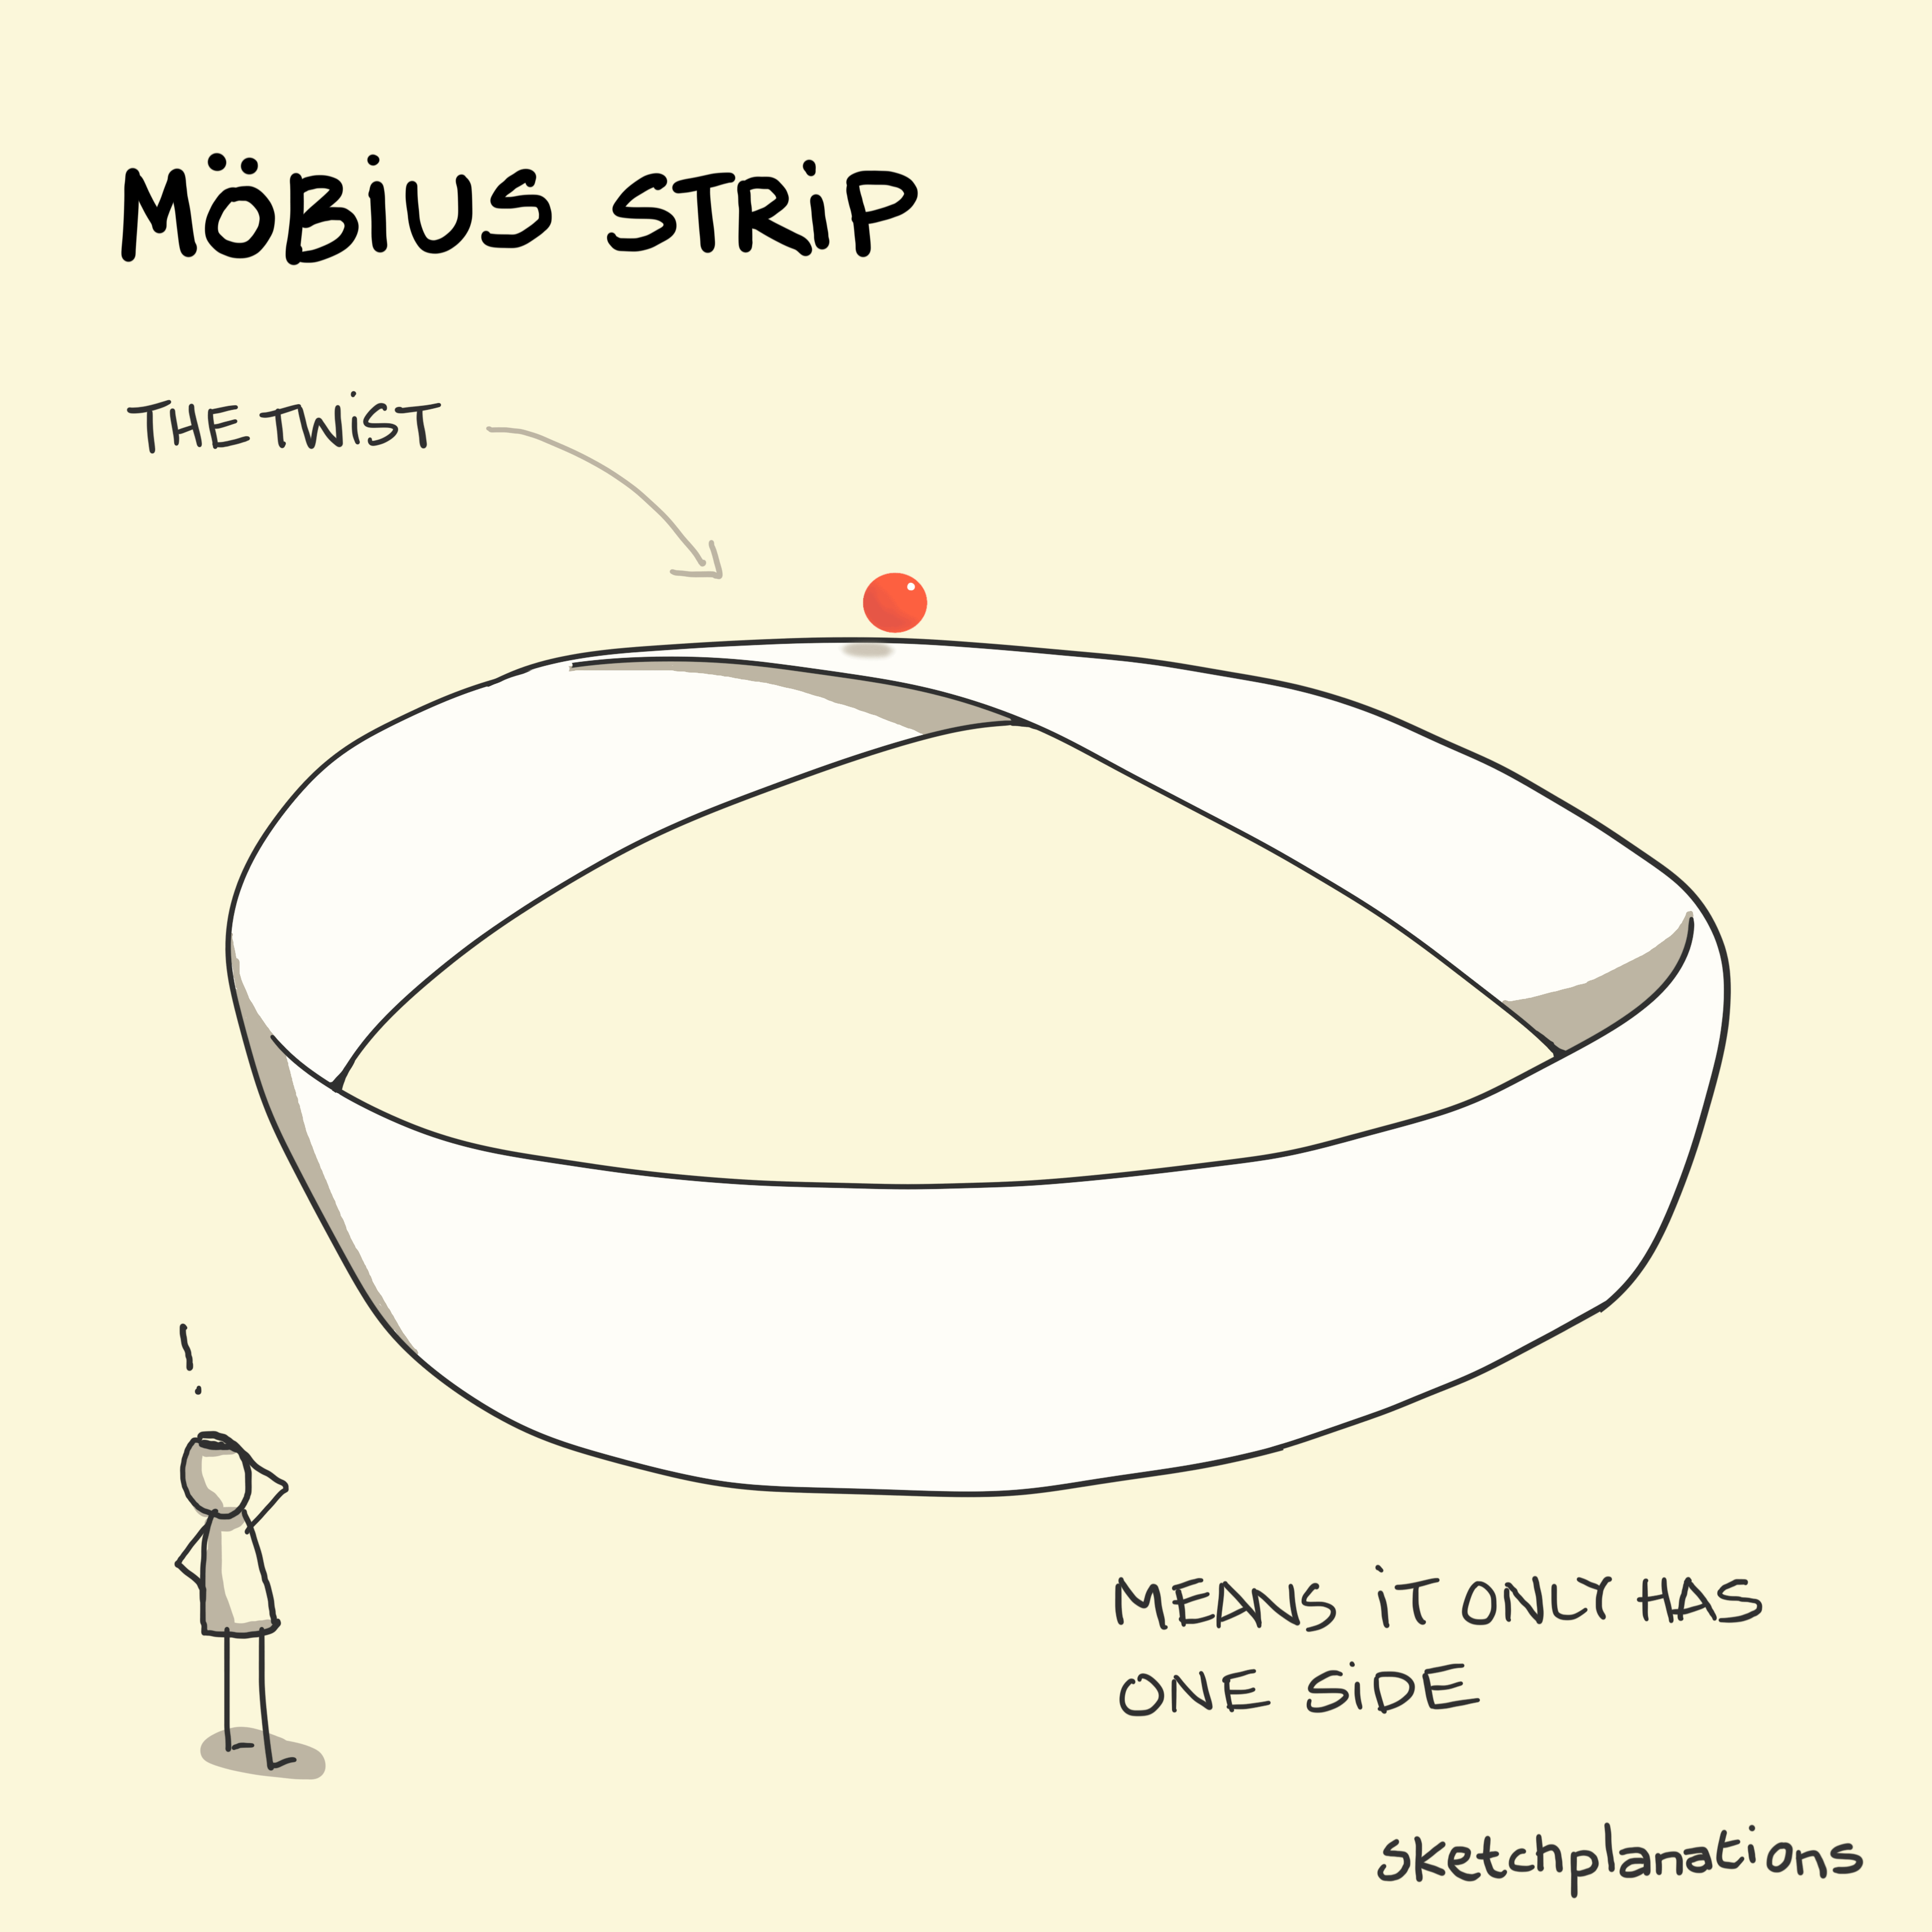 Möbius strip animation: a small red ball continuously rolls around the surface of a 2-dimensional strip that has been twisted before having its ends joined - meaning the ball covers the entire shape.  